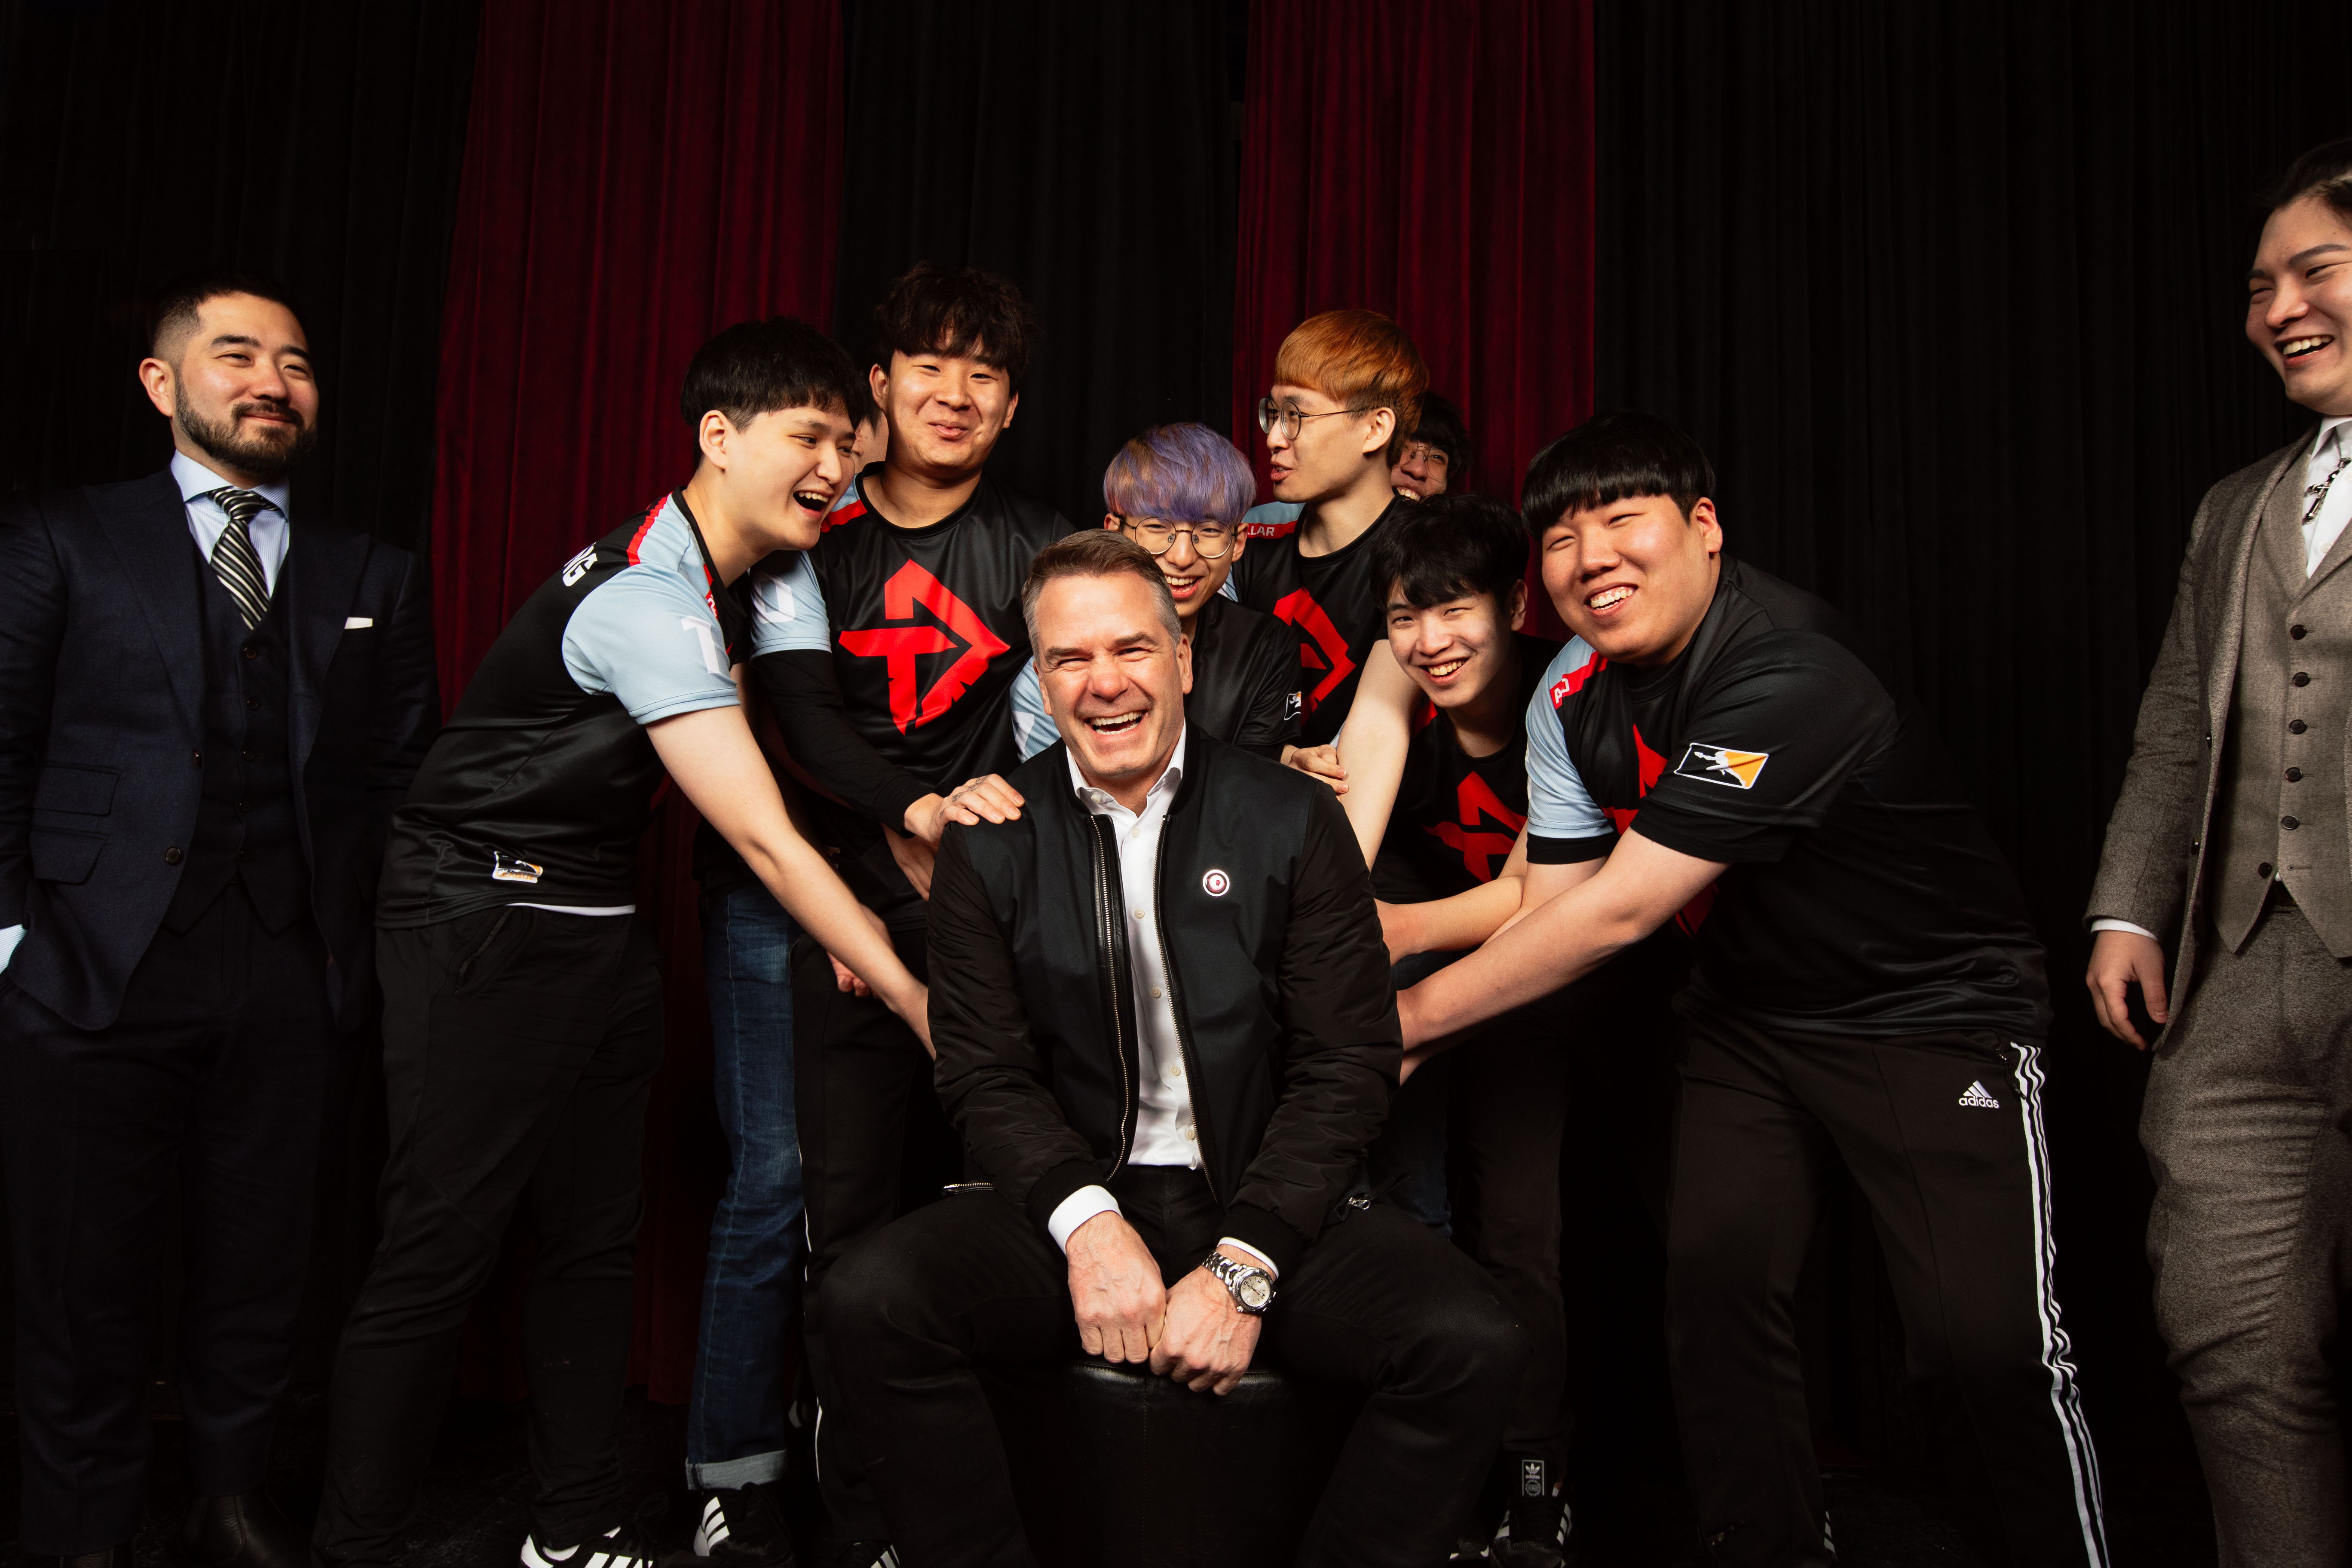 Jae (Defiant GM - far left) and Bishop (Head Coach - far right) overlook Defiant players as they interact with Chris Overholt (OverActive Media President/CEO) - credit: @jaycrewphotography